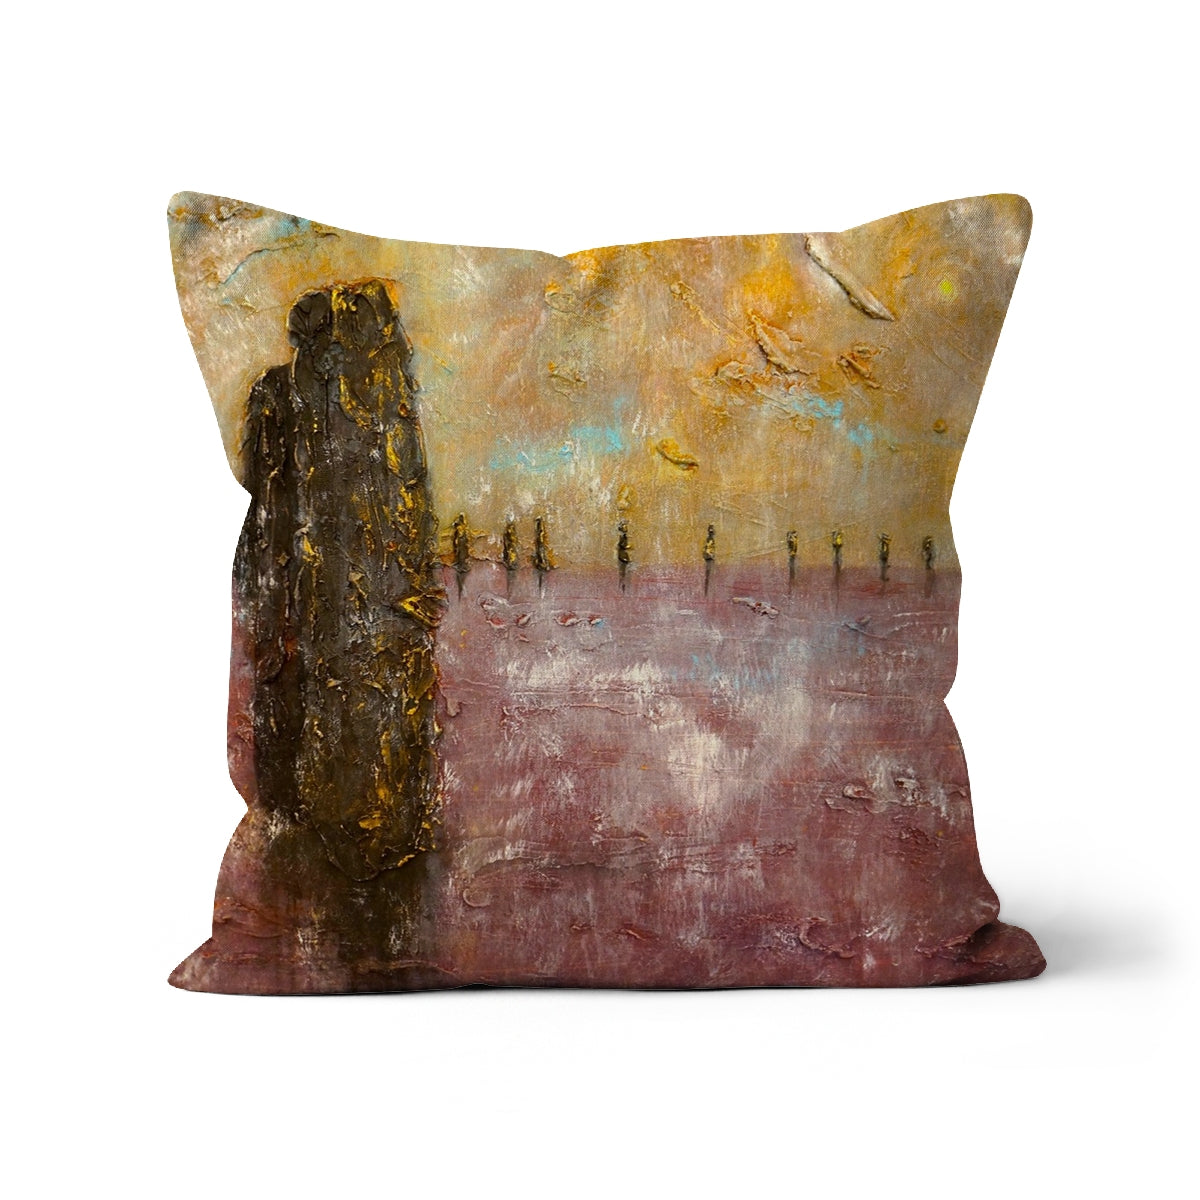 Brodgar Mist Orkney Art Gifts Cushion-Cushions-Orkney Art Gallery-Linen-18"x18"-Paintings, Prints, Homeware, Art Gifts From Scotland By Scottish Artist Kevin Hunter